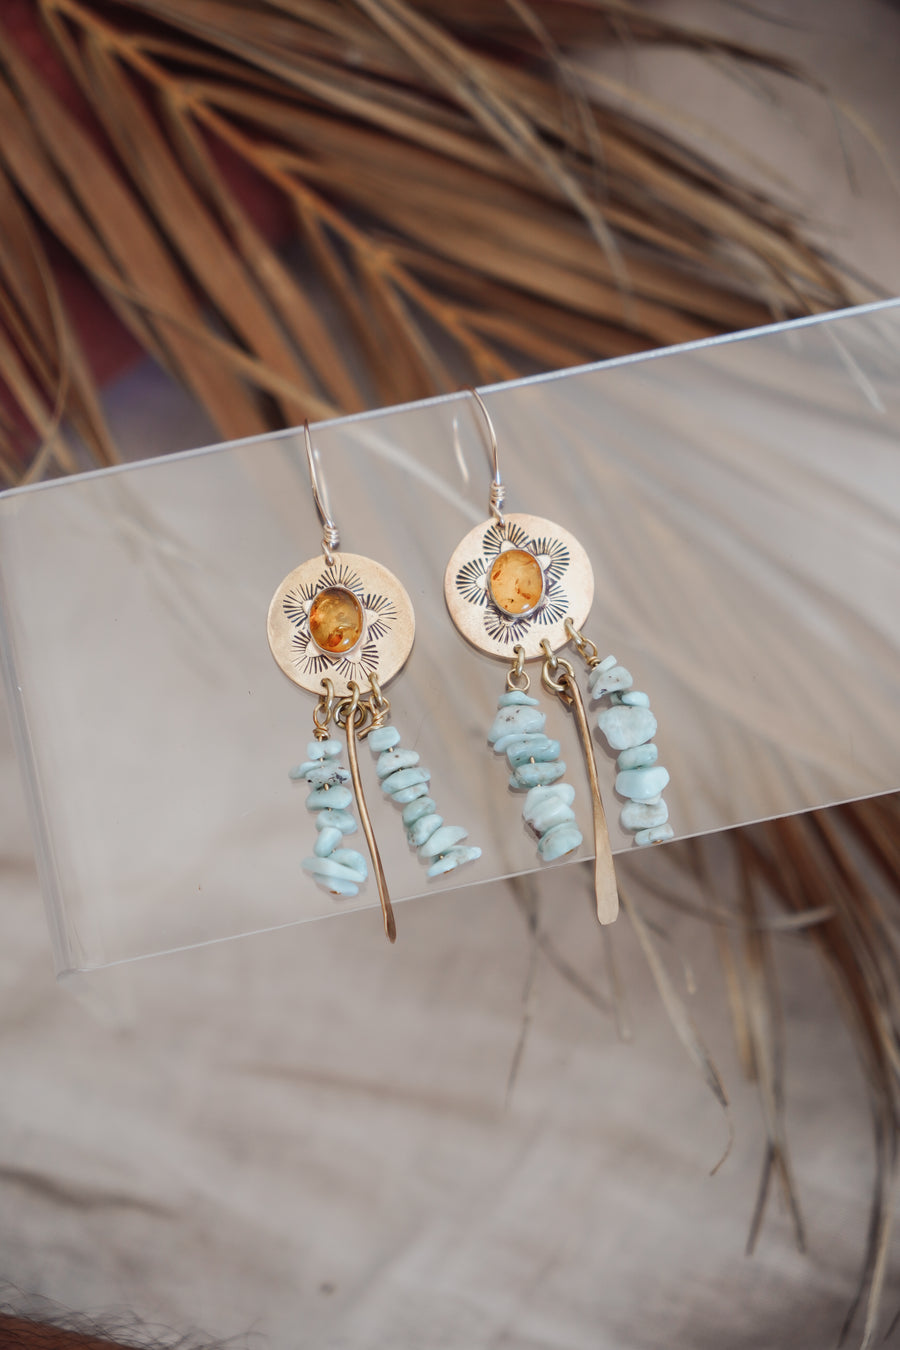 The Amber Blossom Dangle Earrings with Larimar